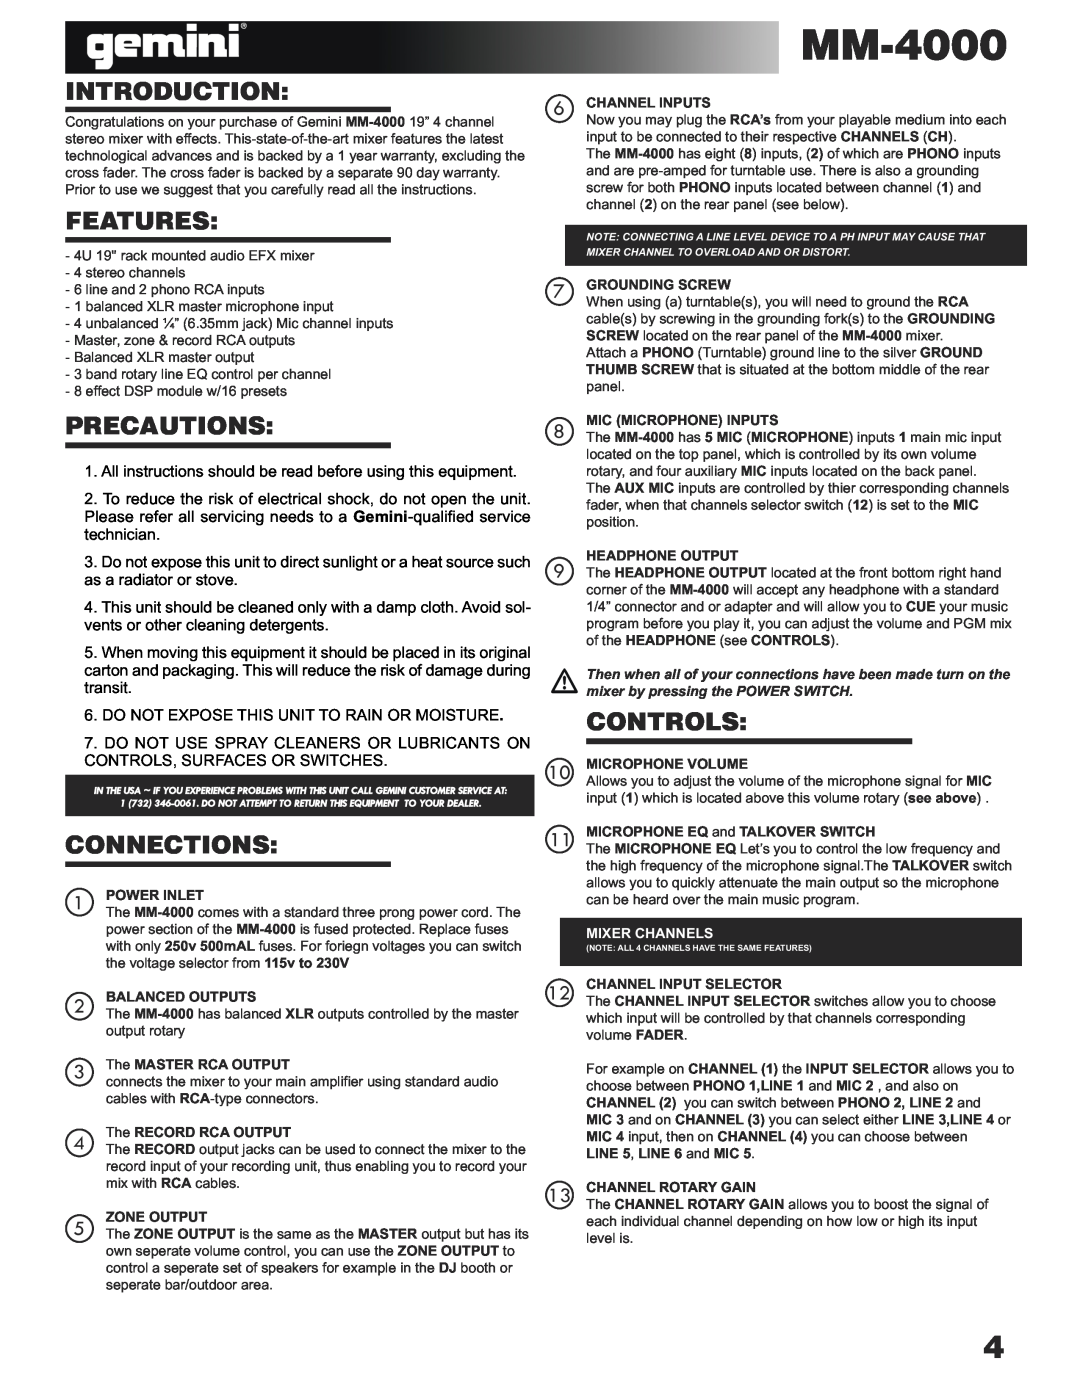 Gemini MM-4000 manual Introduction, Features, Precautions, Connections, Controls 